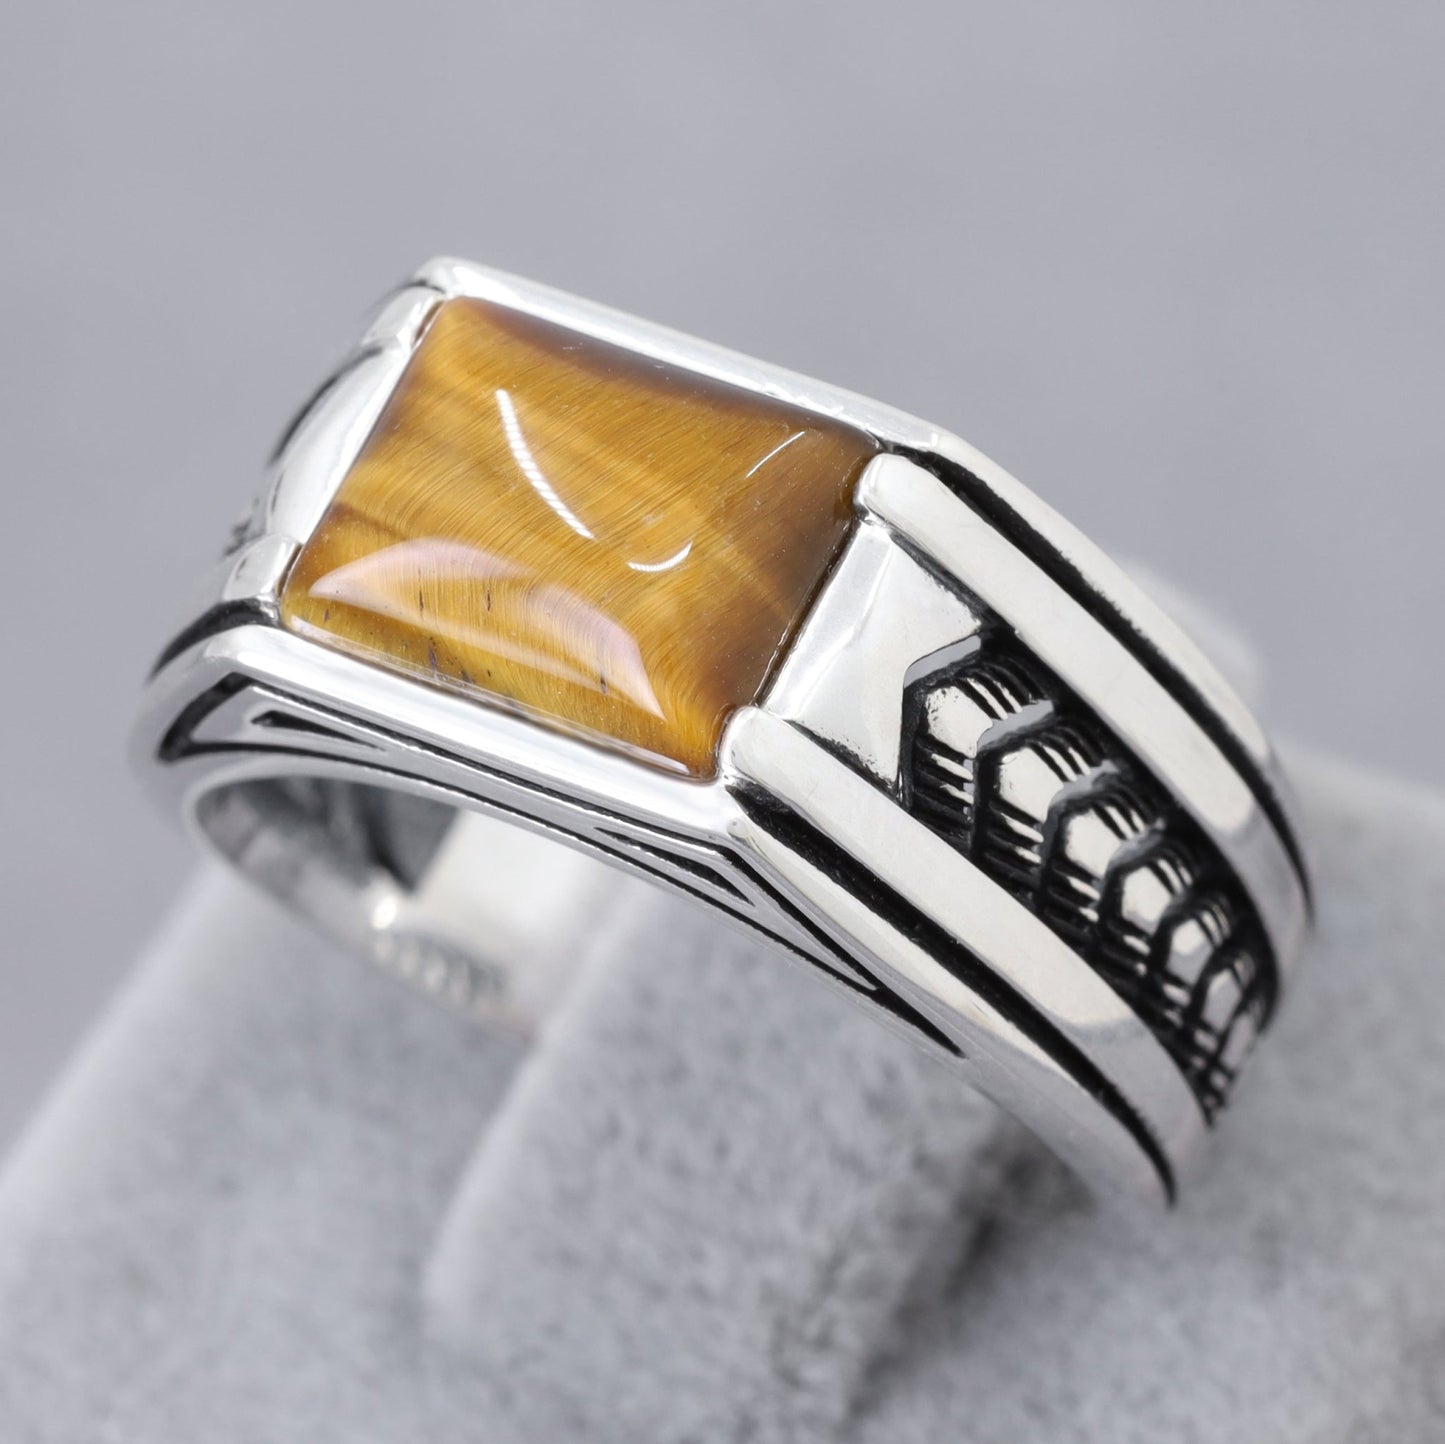 Chimoda Sterling Silver Rings for Men with Arrow Pattern and Tiger Eye Stone - Chimoda